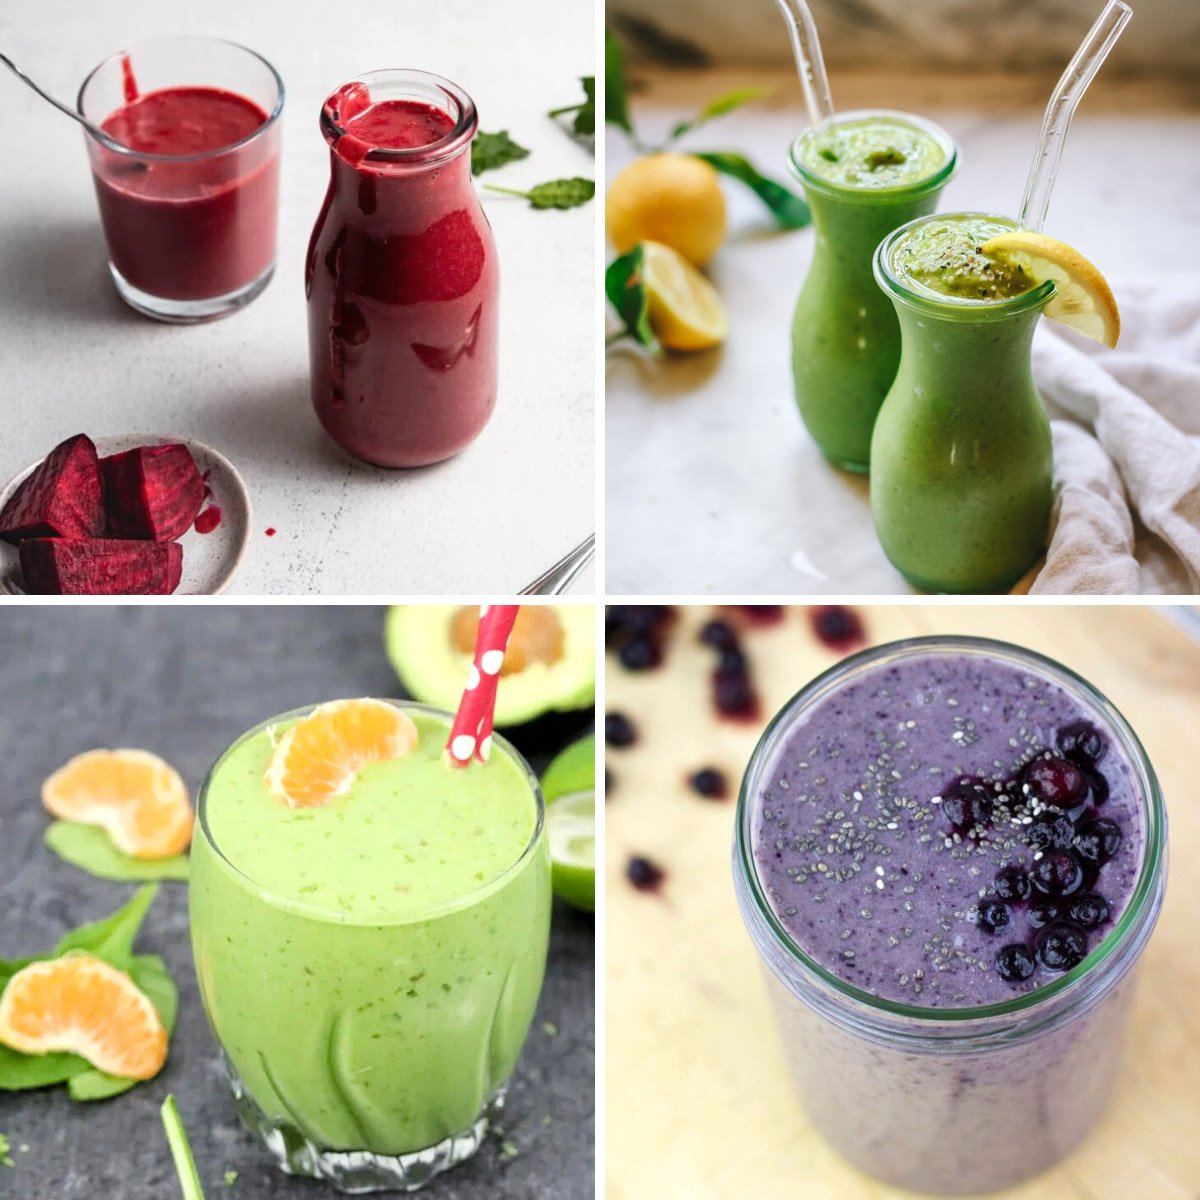 are smoothies good for weight loss?